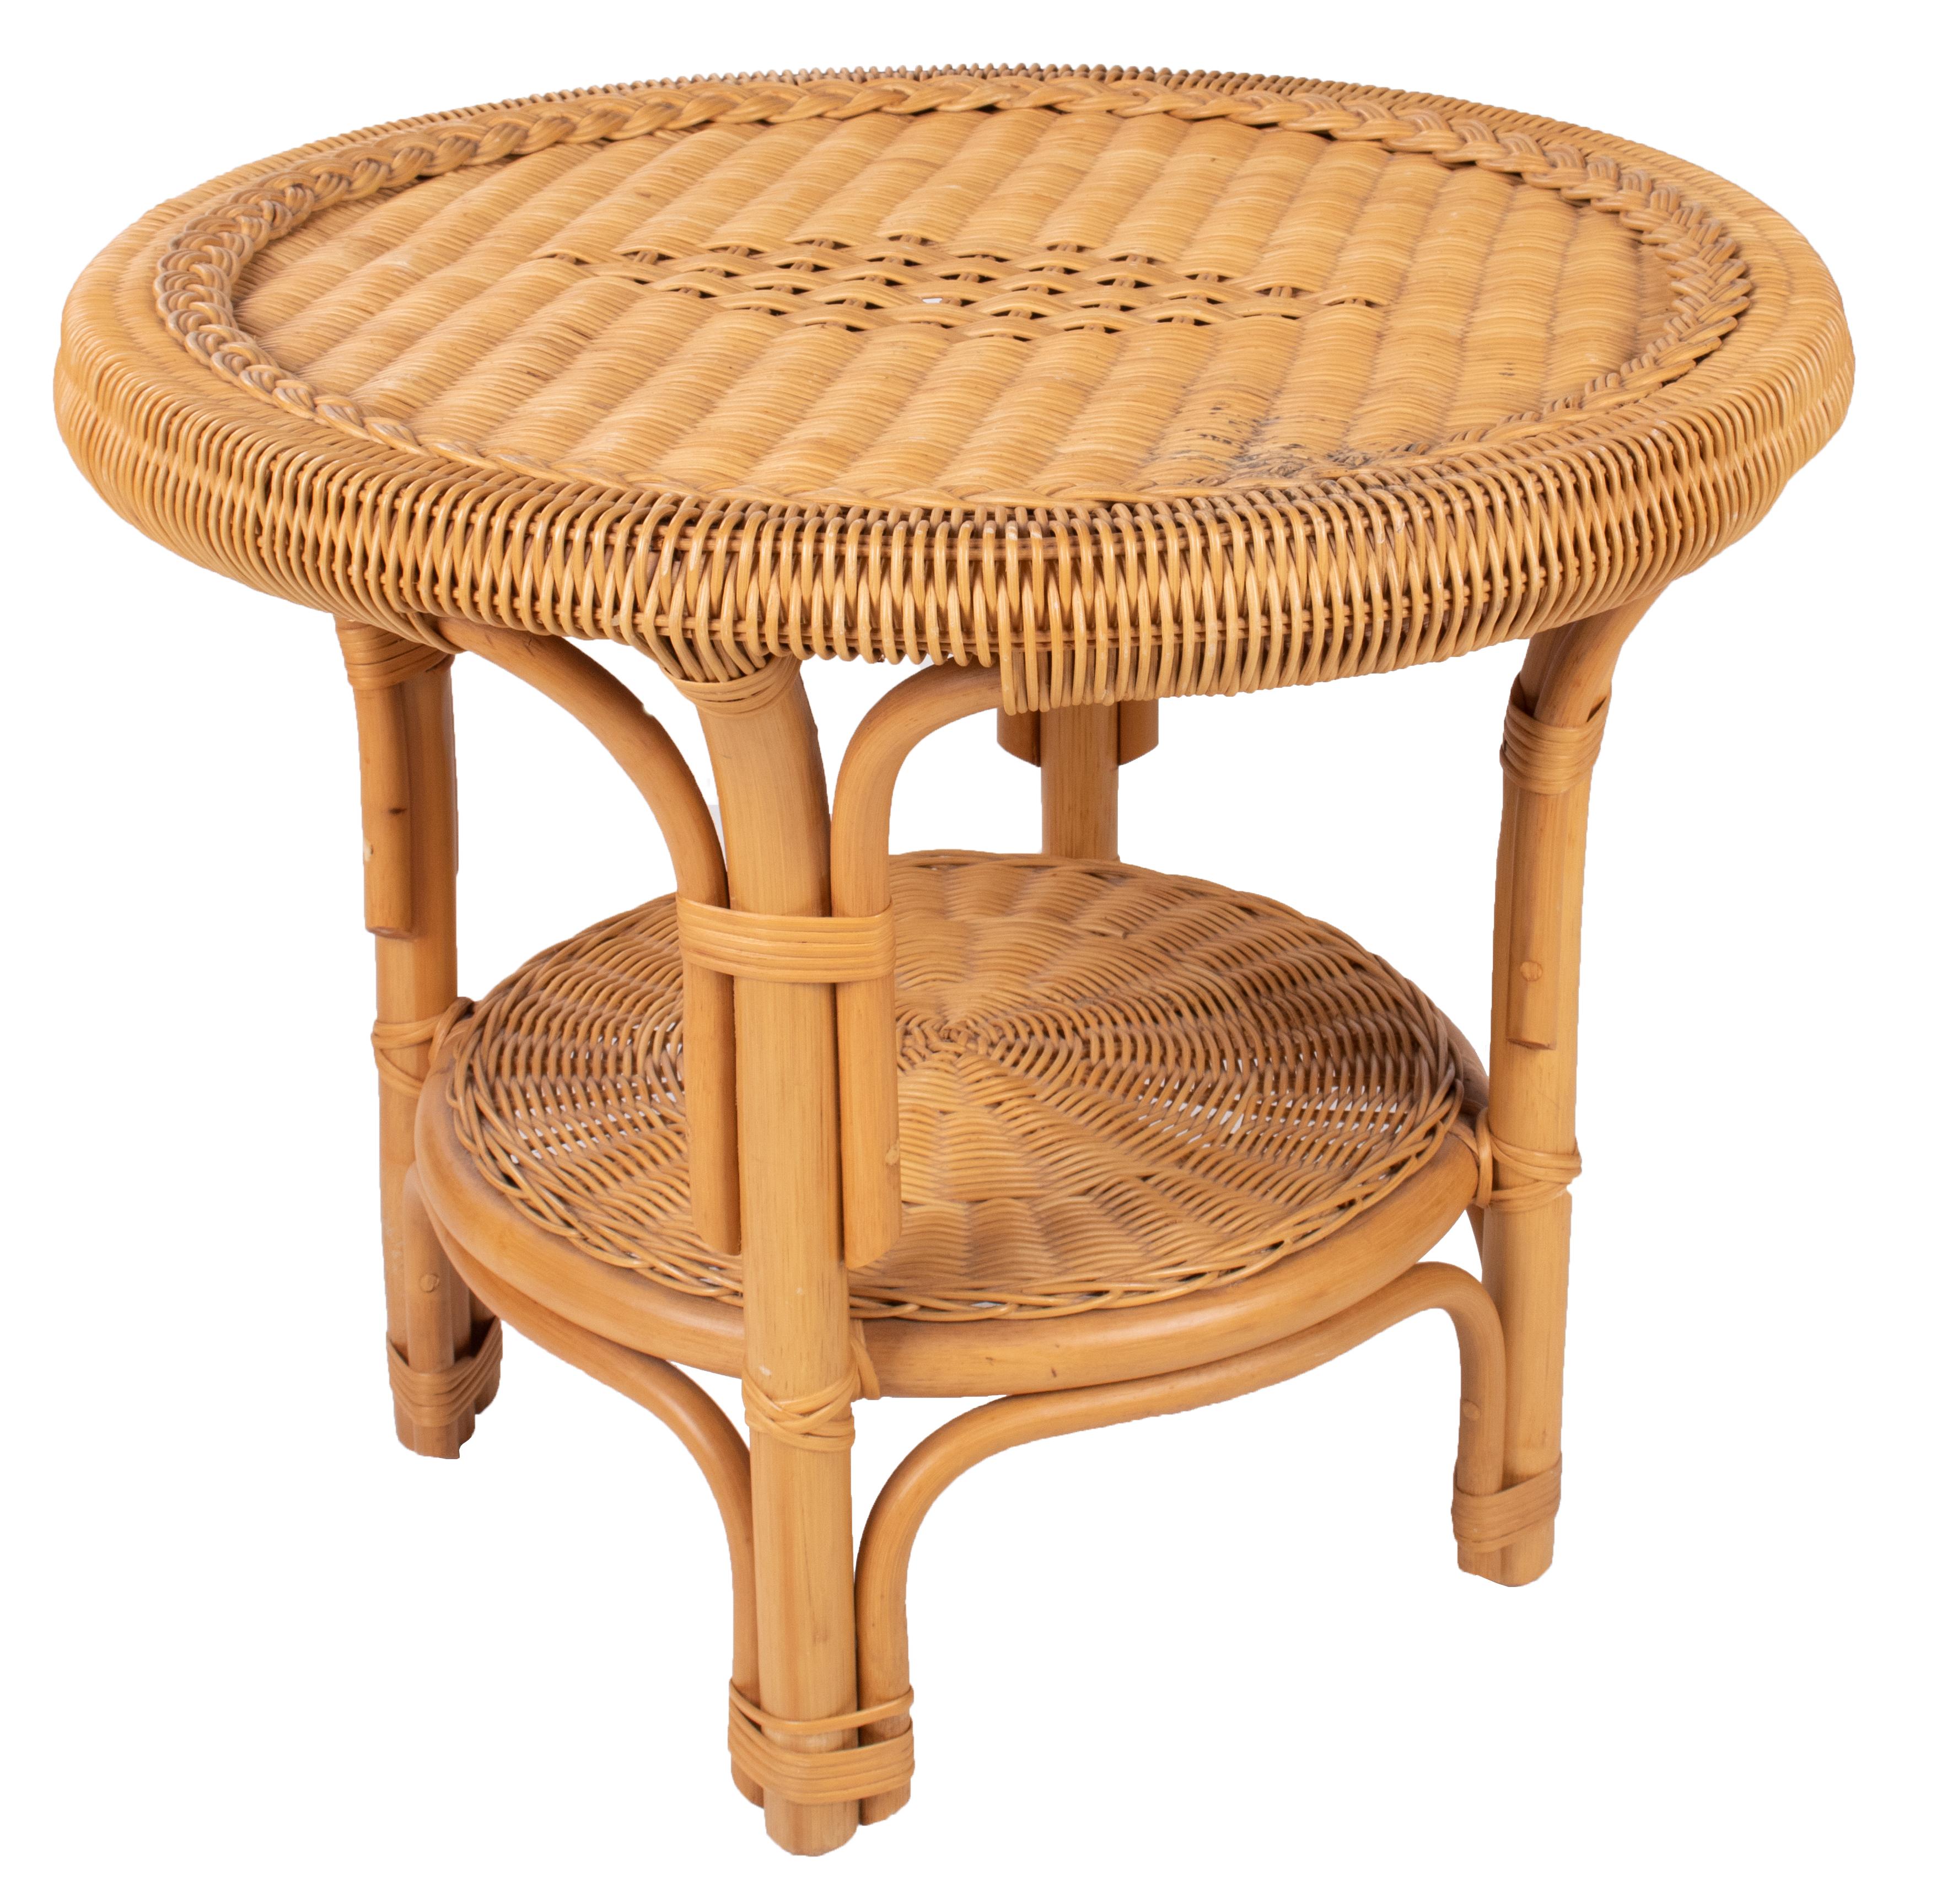 1980s Spanish Bamboo and Wicker Round Side Table